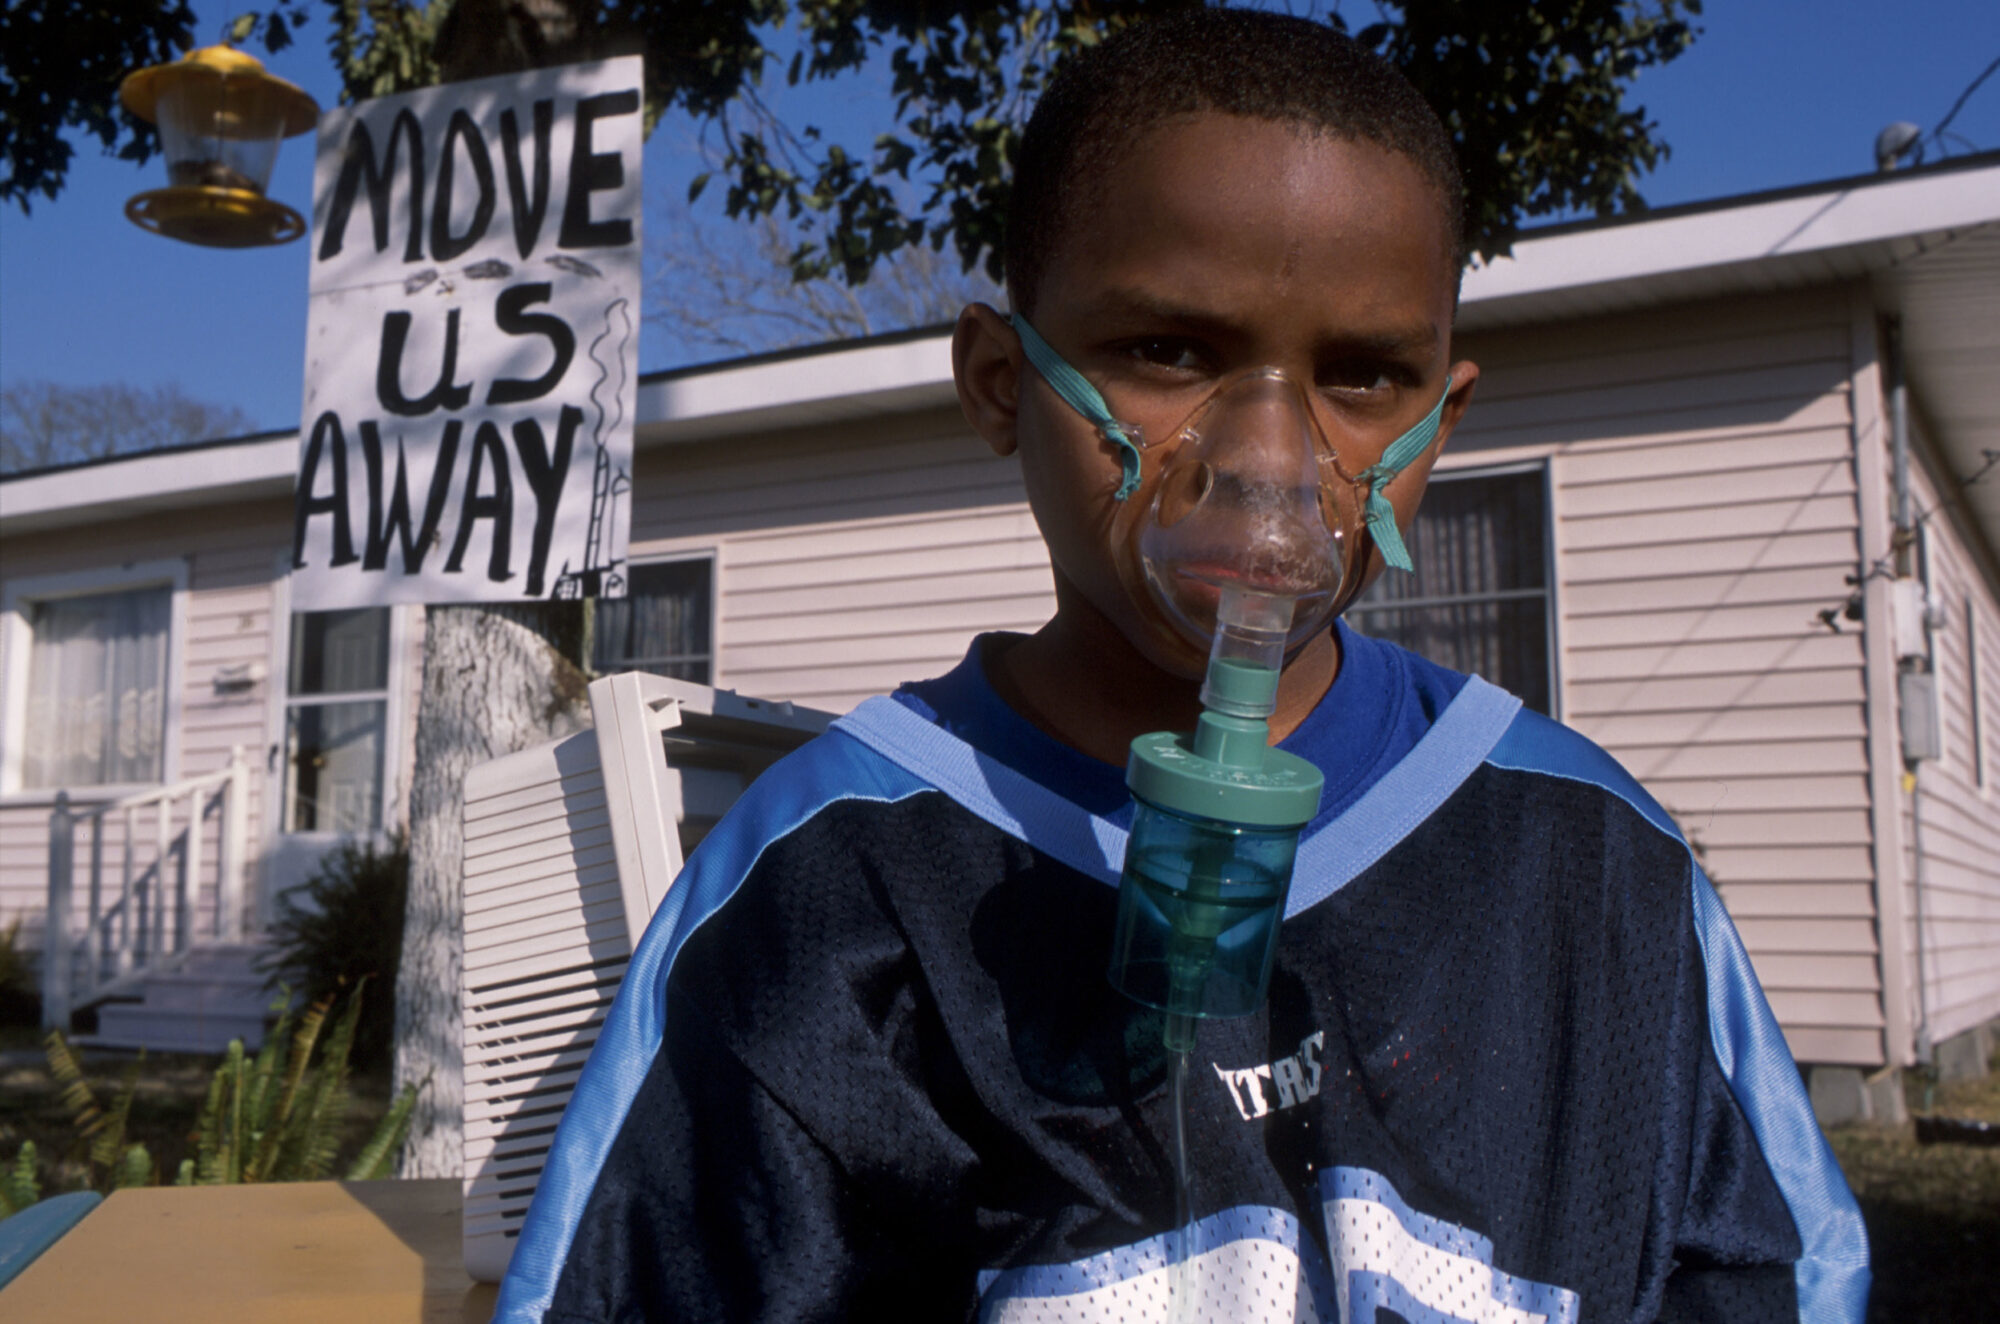 A Black child wearing an oxygen mask looks into the camera. Behind him is a white clapboard house with a hand-painted sign reading 'Move us away'.